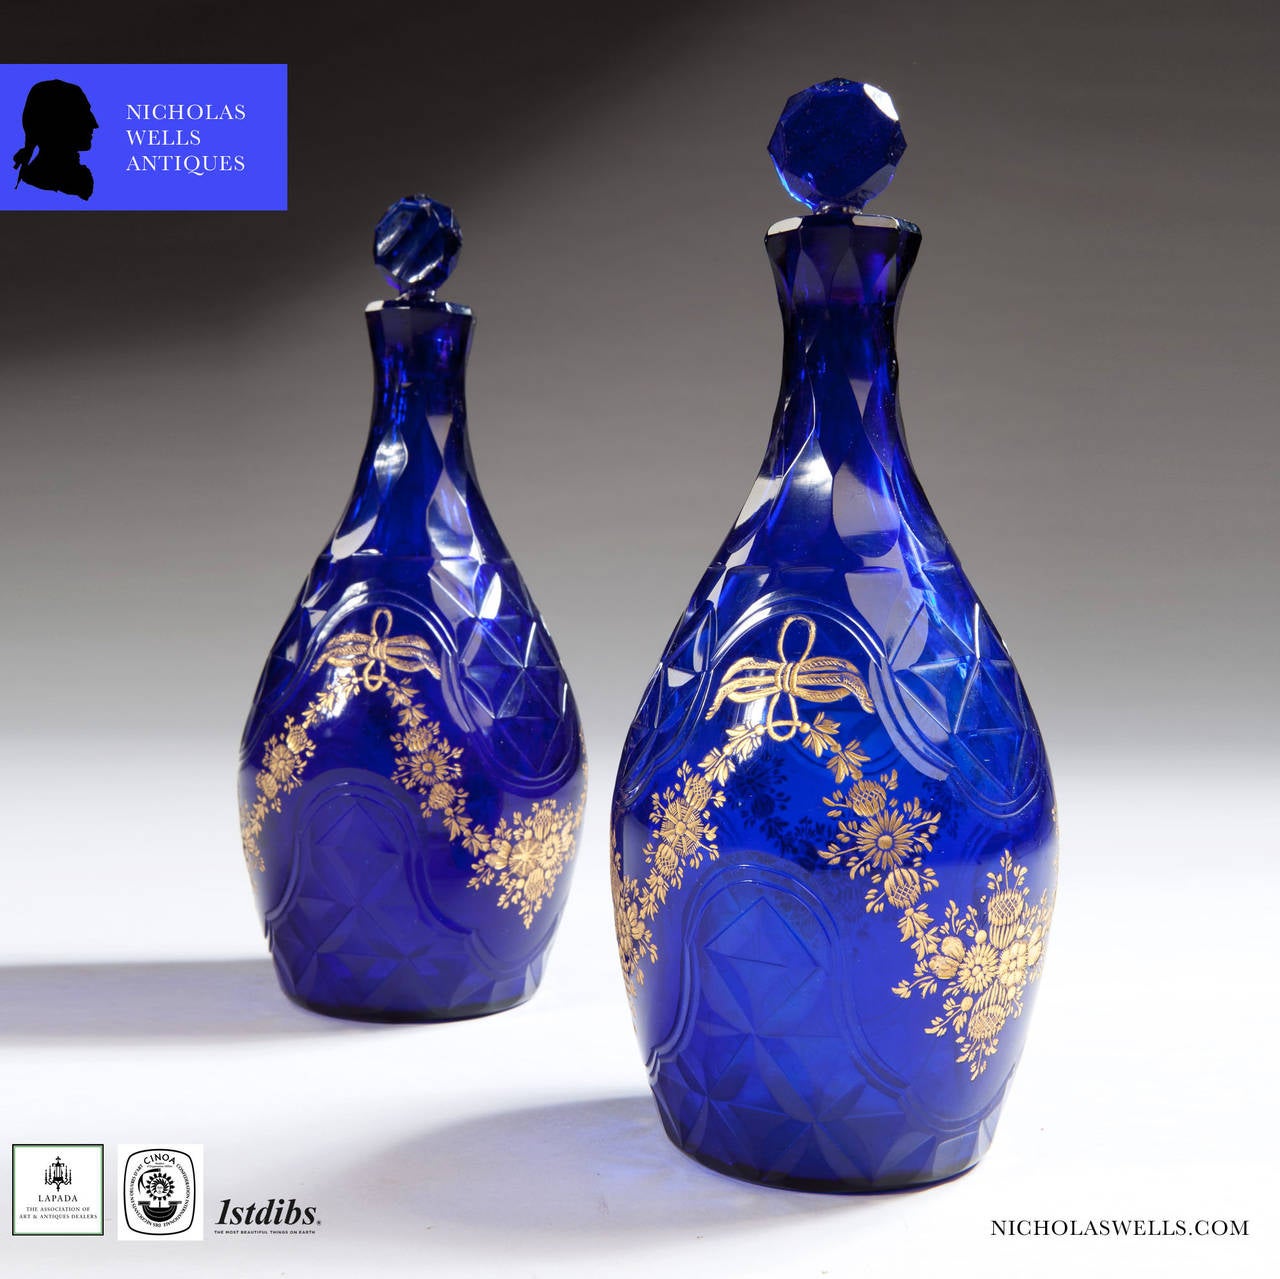 Pair of Late 18th Century Baluster Form Facetted Blue Glass Decanters In Excellent Condition For Sale In London, by appointment only